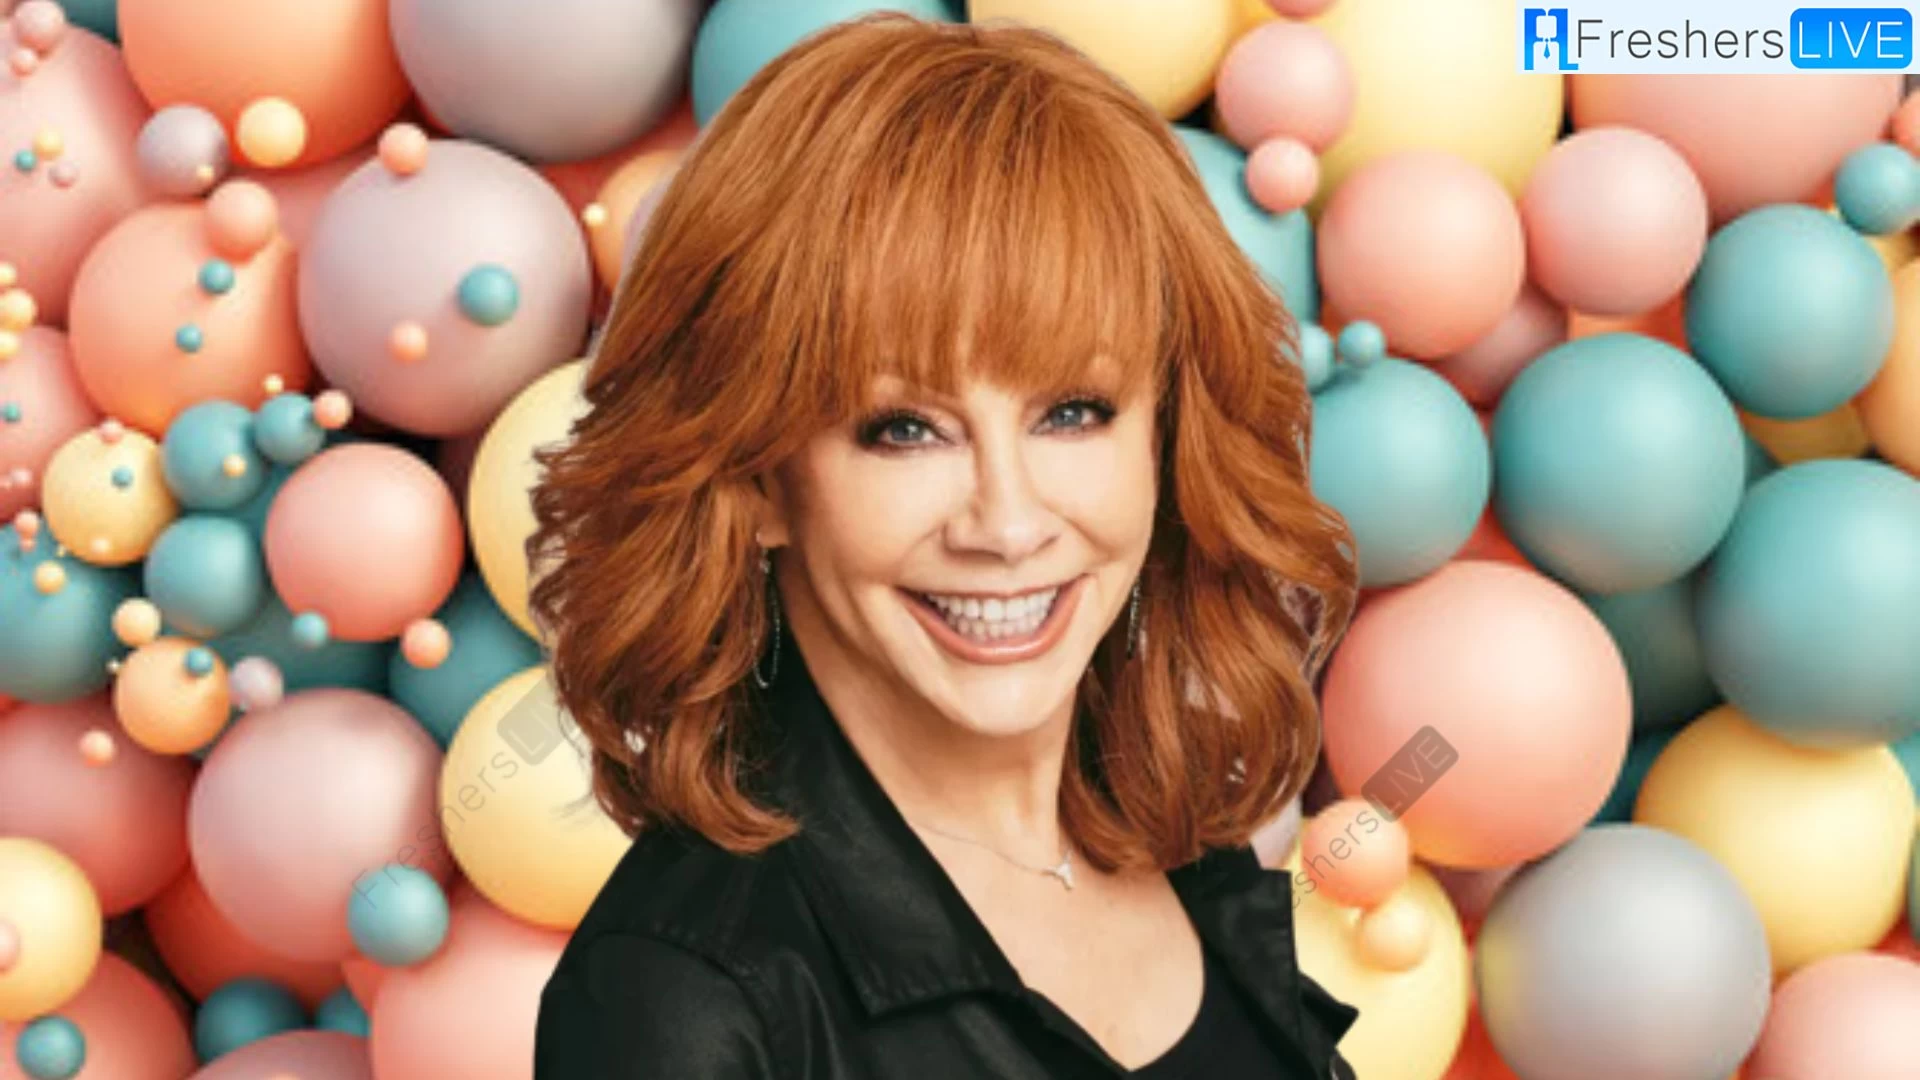 Does Reba McEntire Have Kids? How Many Kids Does Reba McEntire Have? Know Everything about Reba McEntire